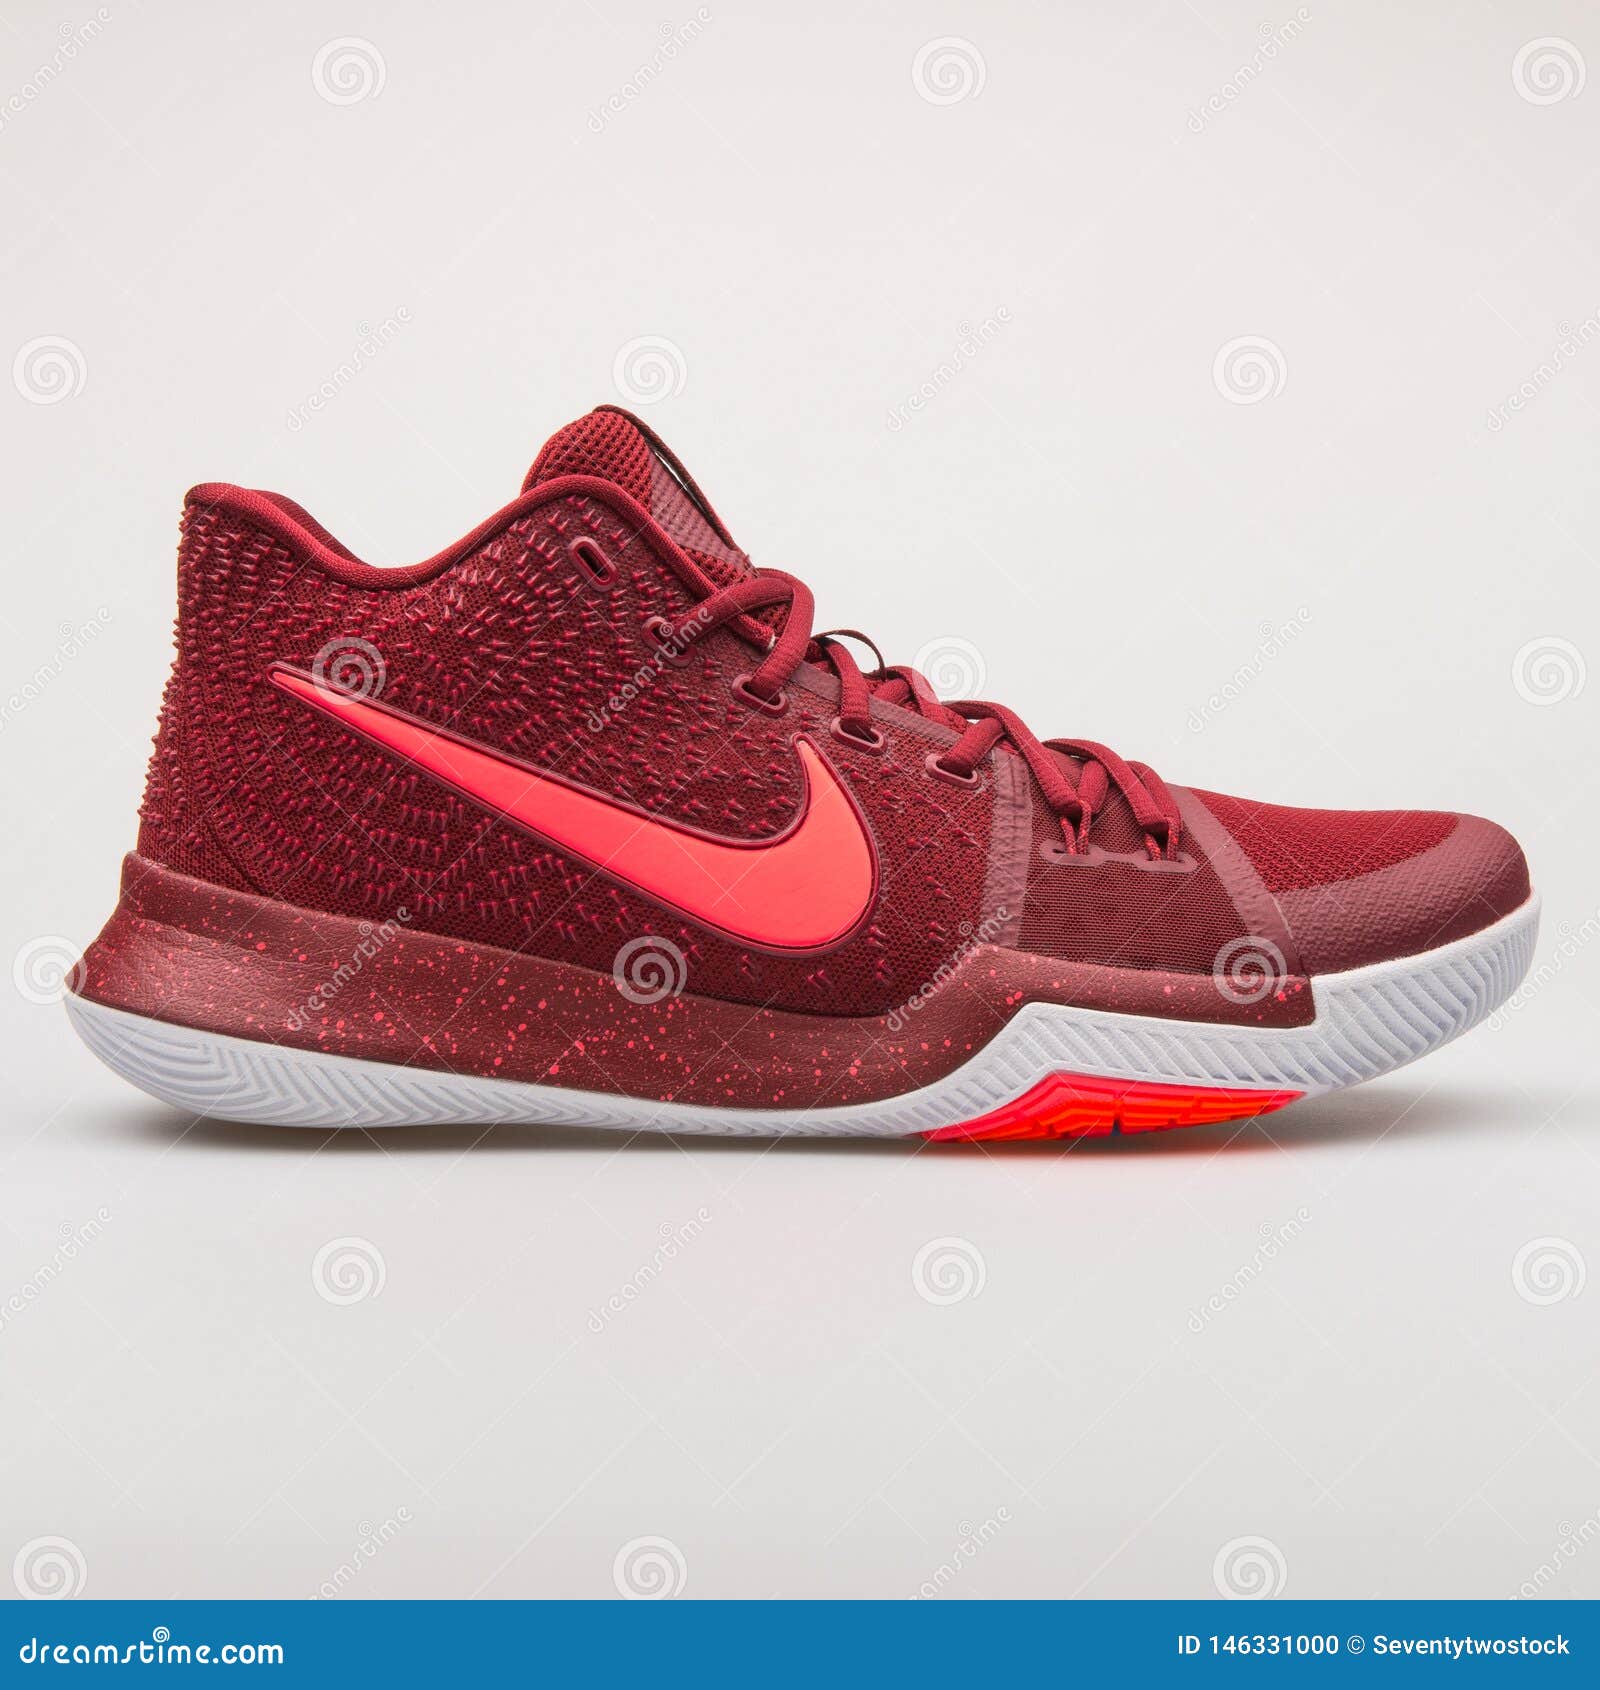 kyrie 3 red and pink